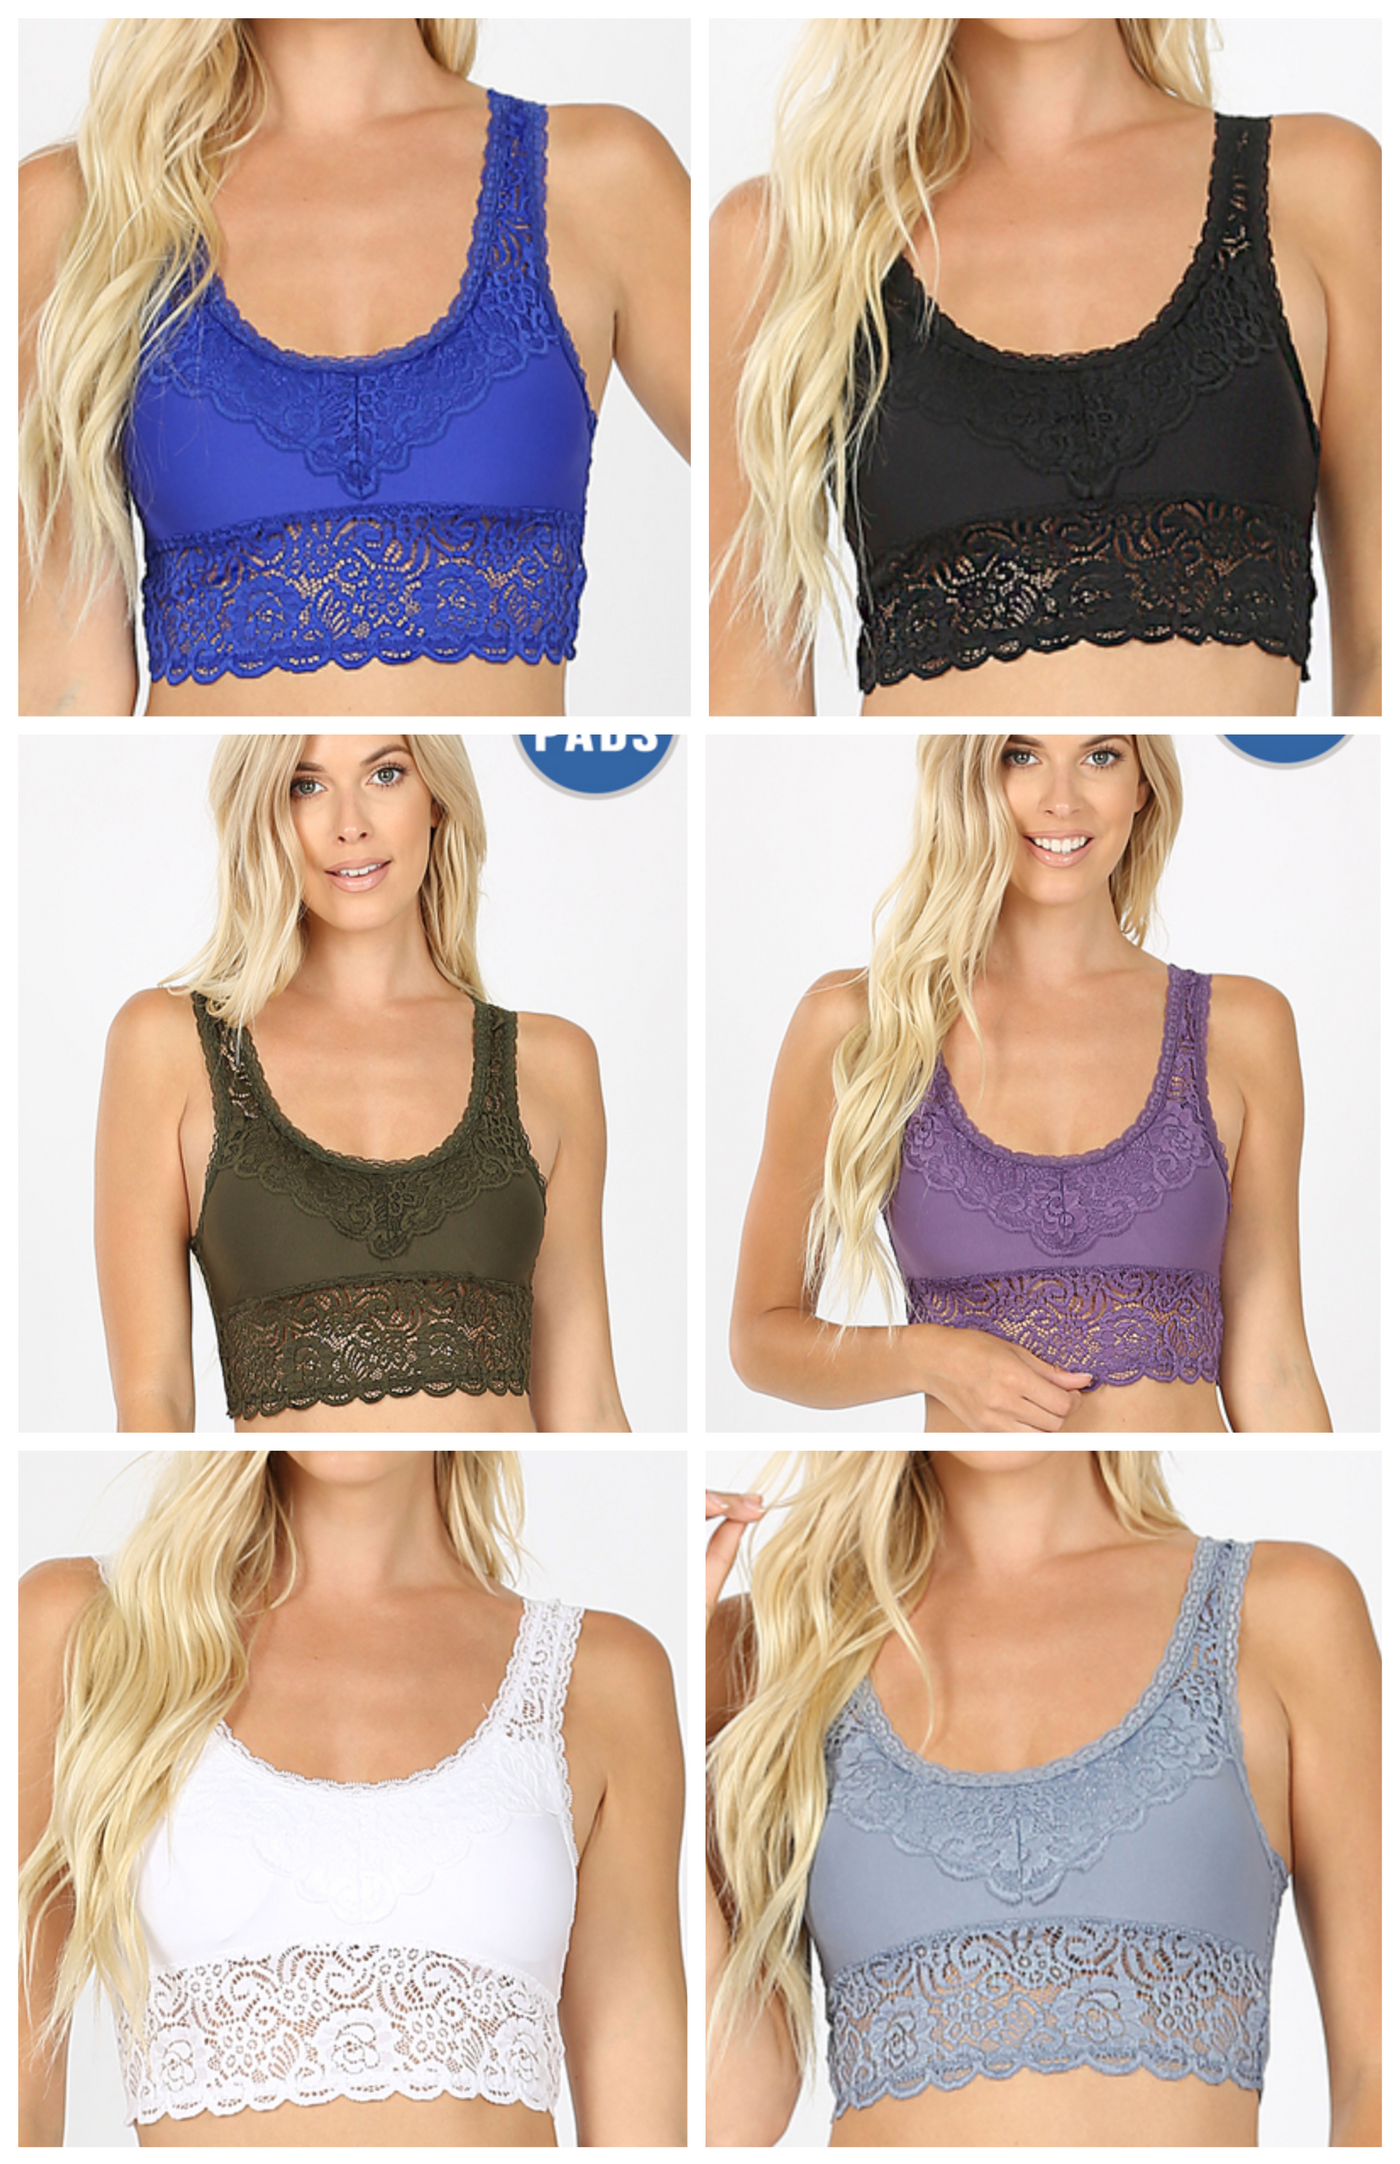 Beautifully Basic Padded Lace Bralette - various colors